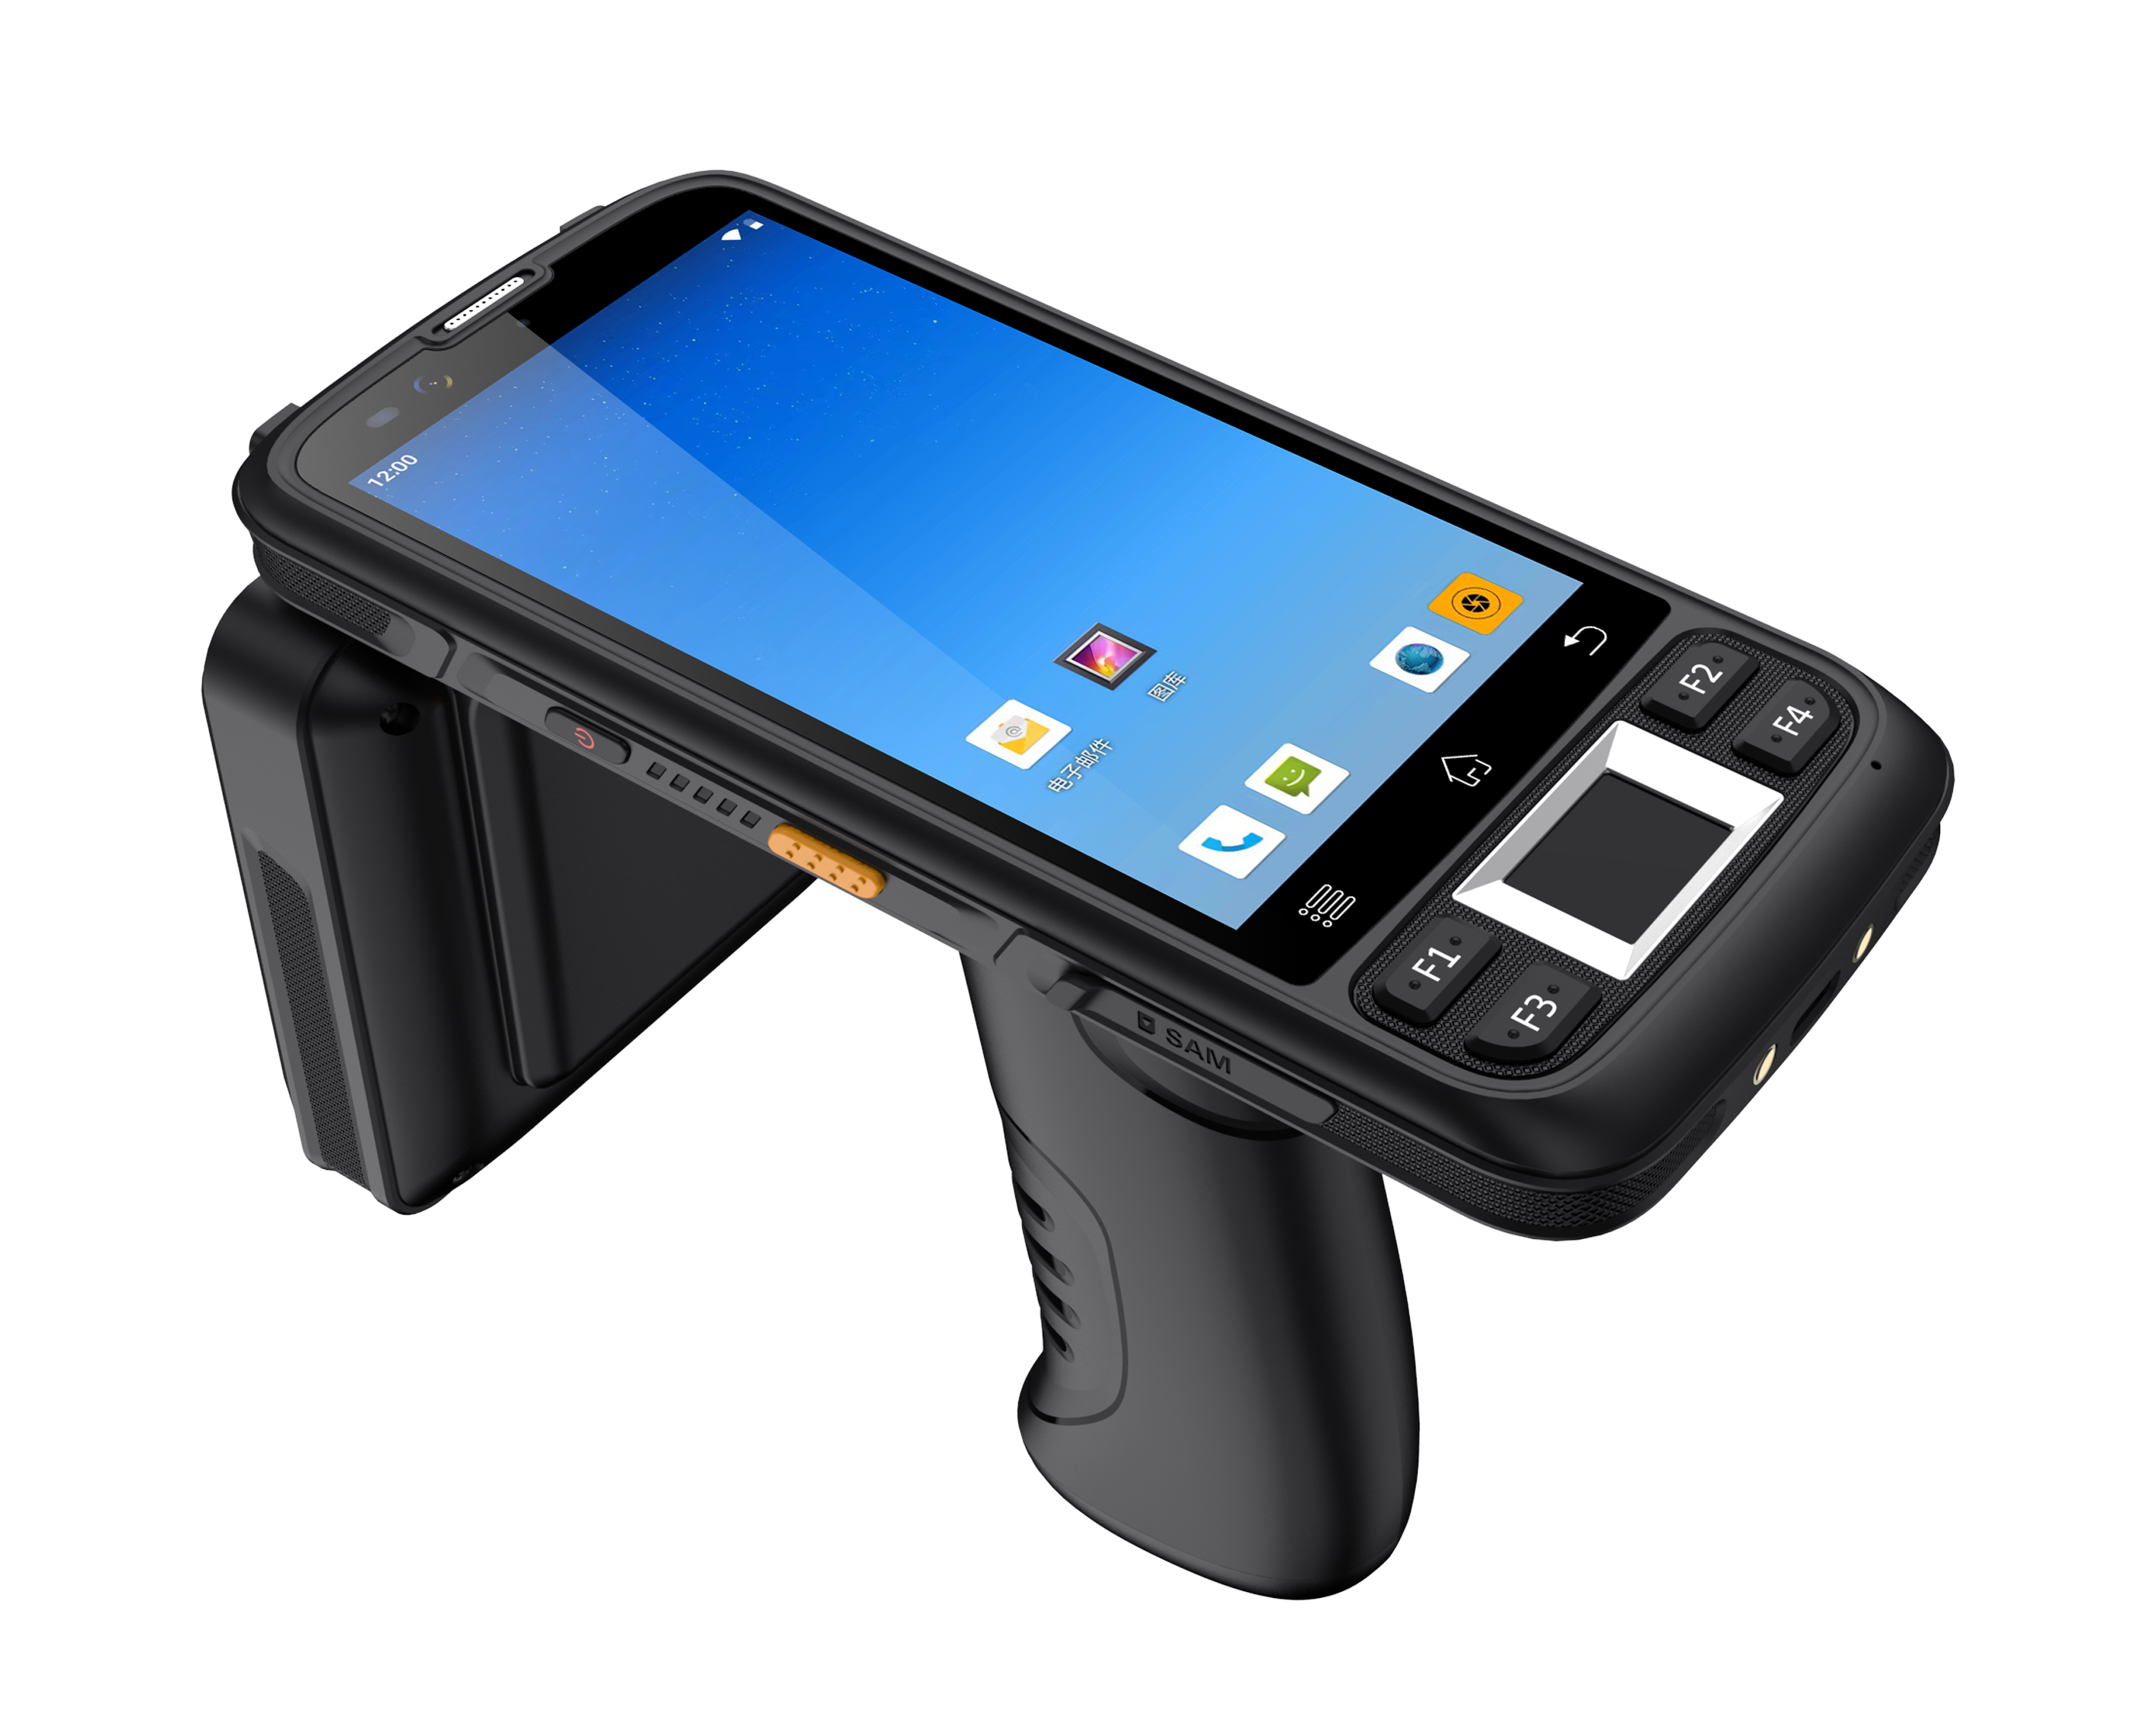 SM720S UHF Android Long Distance Handheld Barcode Scanner